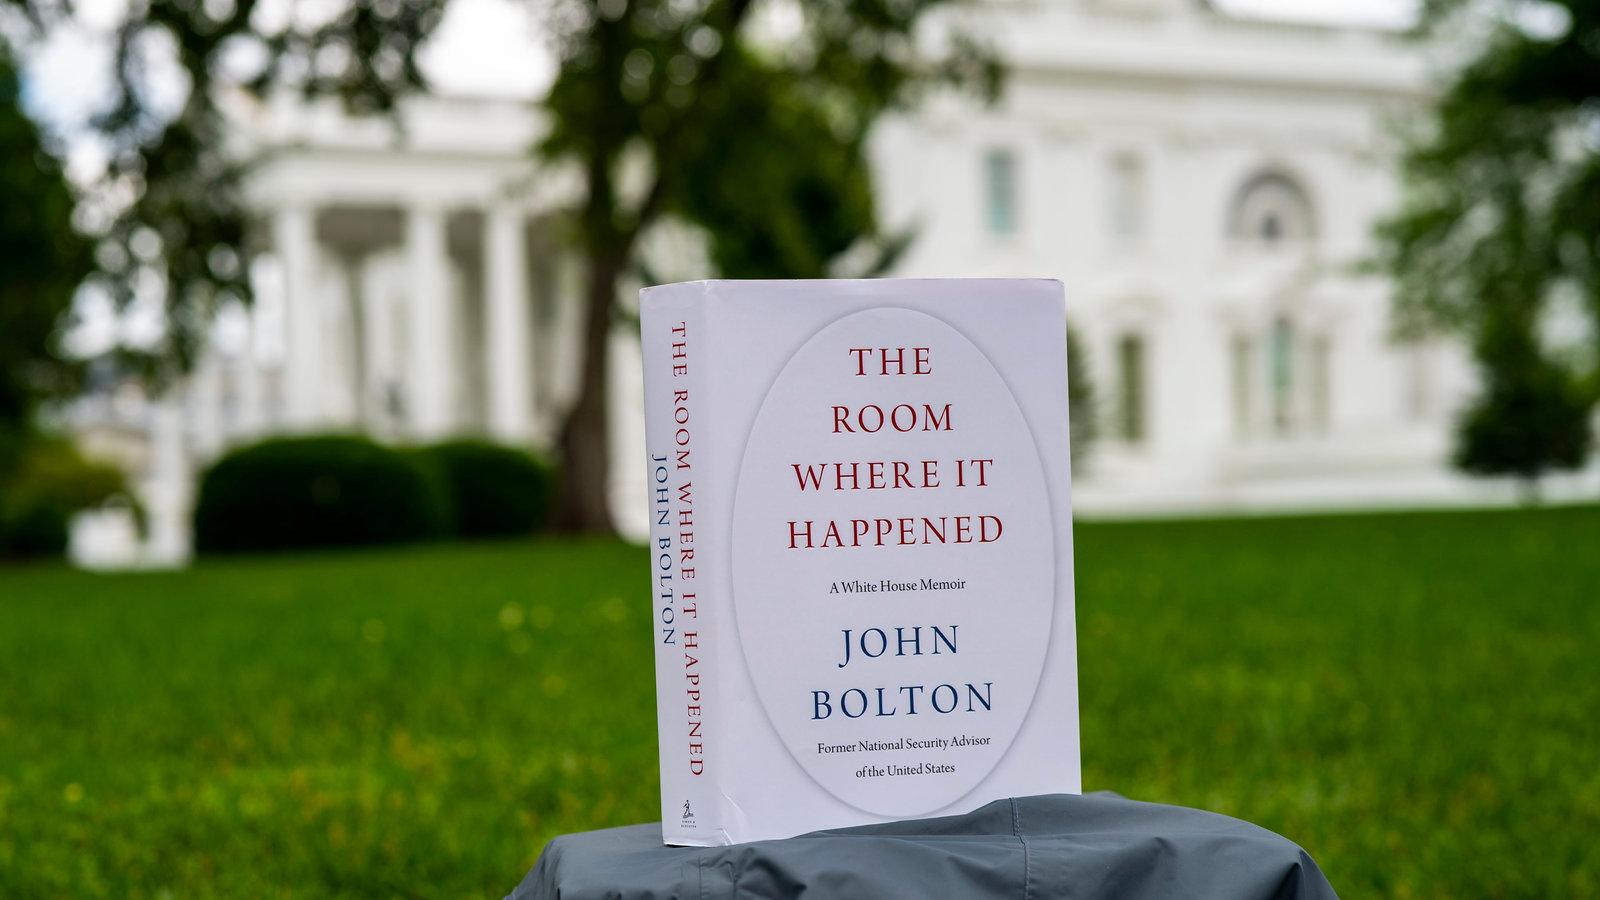 Political Economy Journal: A book review on ‘The Room Where It Happened’; Bolton reveals what happened in the room